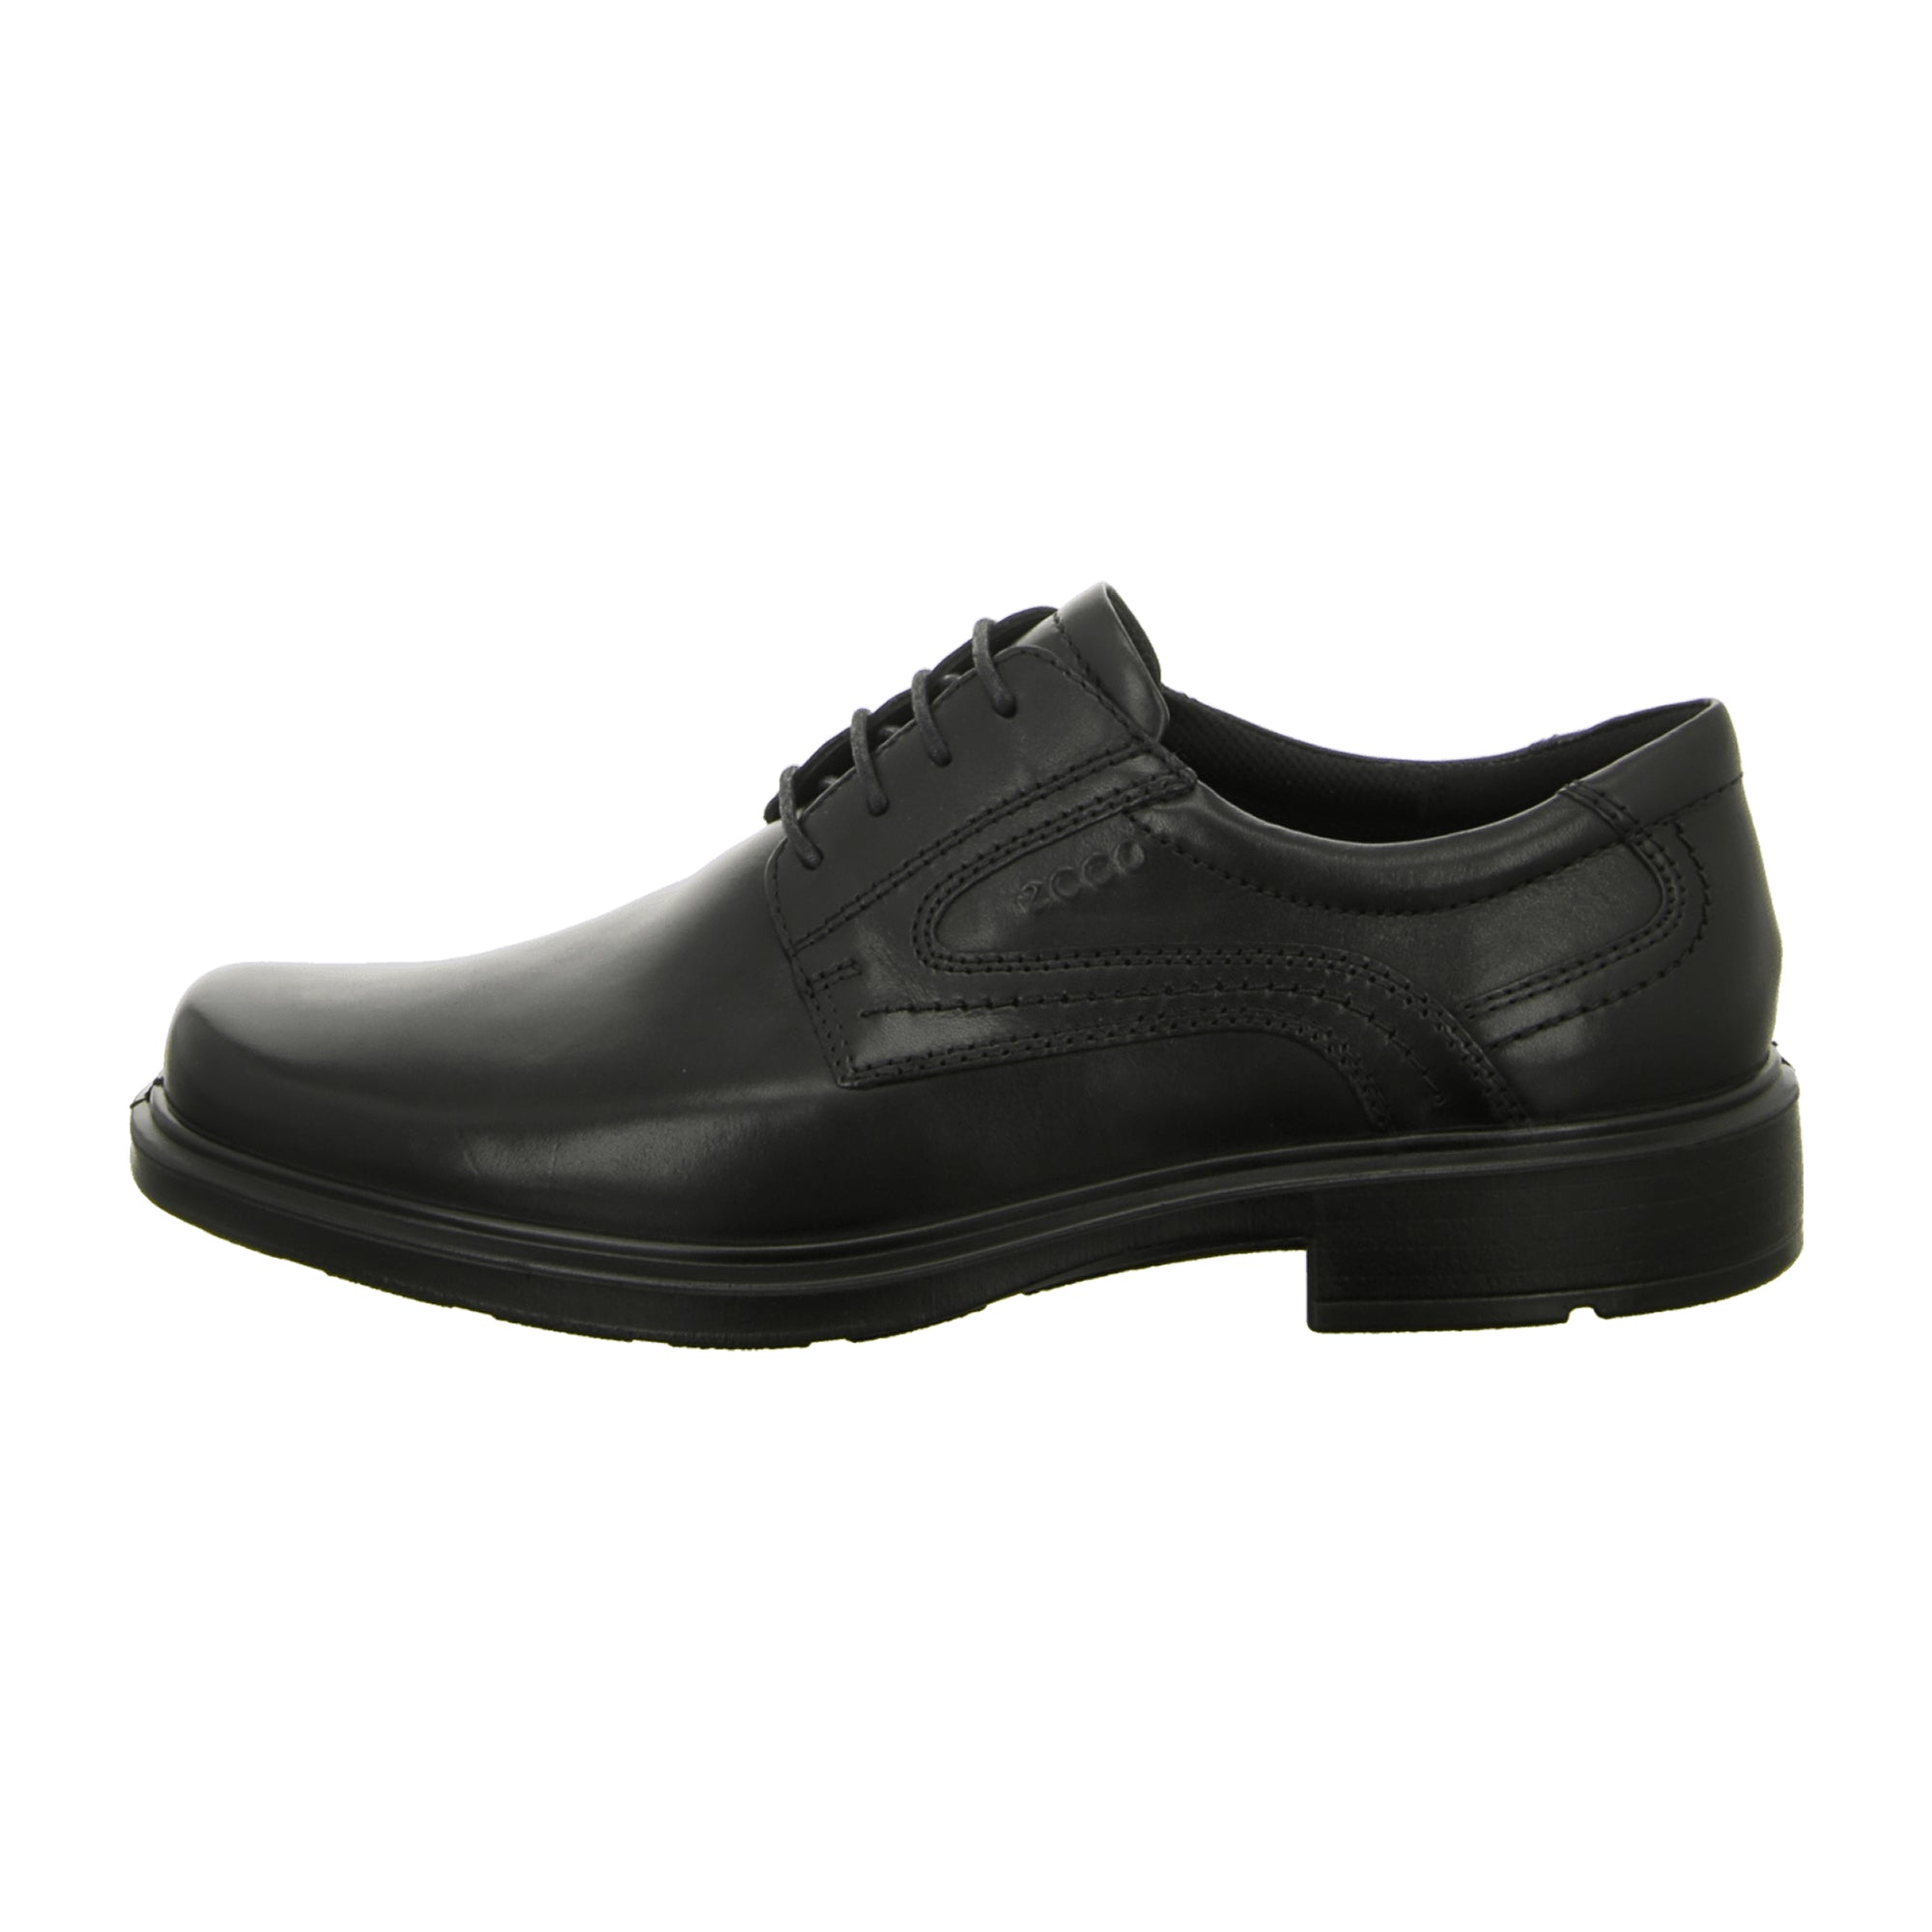 Ecco Helsinki Men's Black Leather Dress Shoes - Durable and Stylish